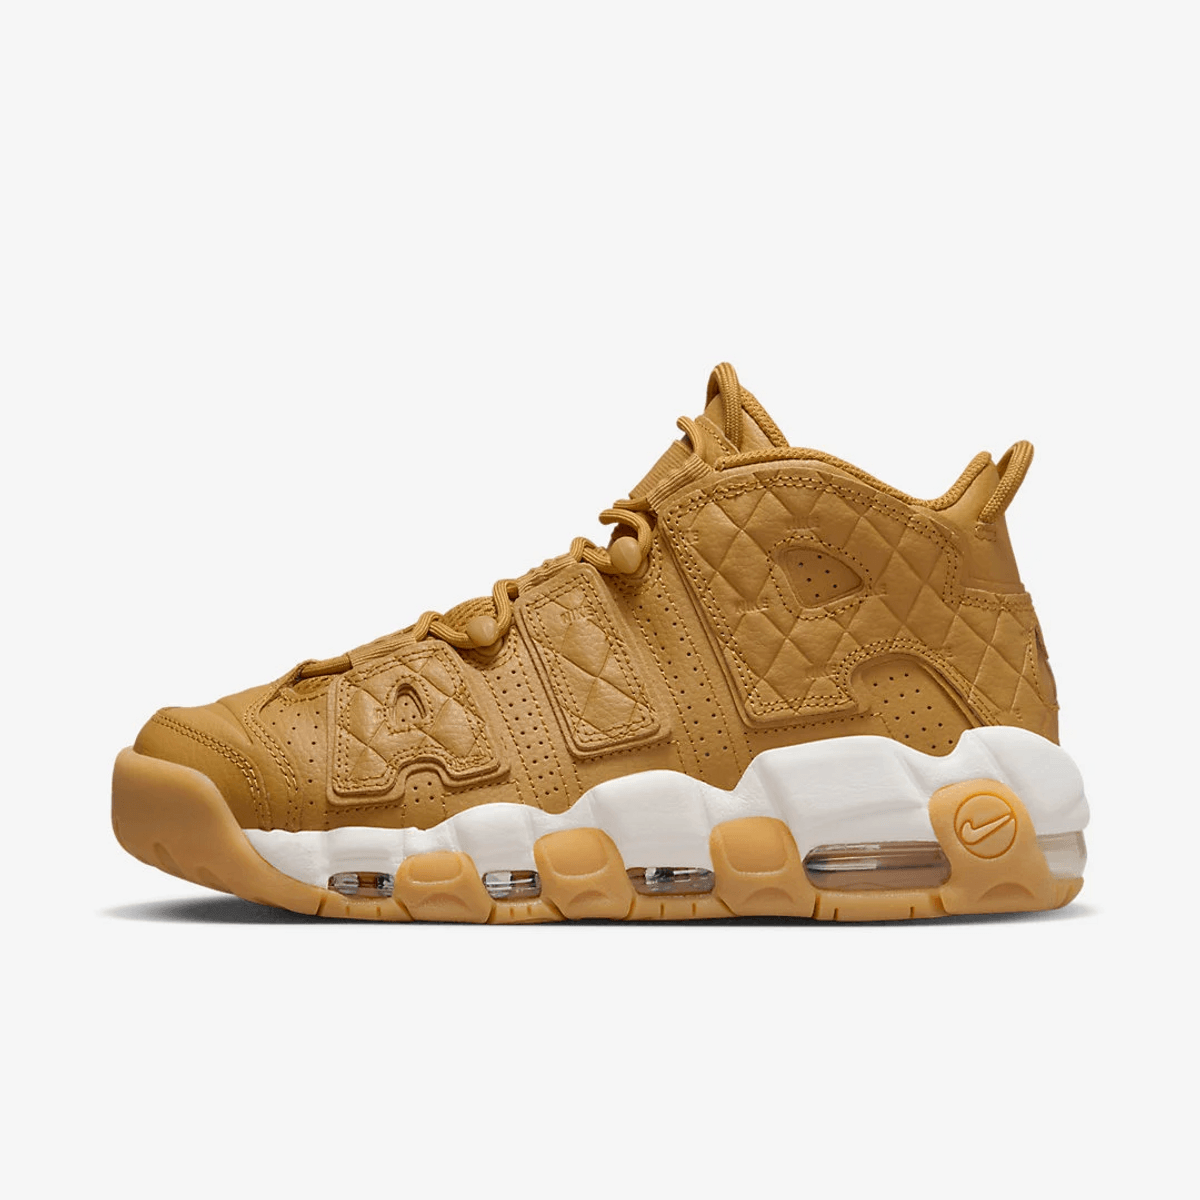 Nike Air More Uptempo Wheat and Gum Light Brown (W)